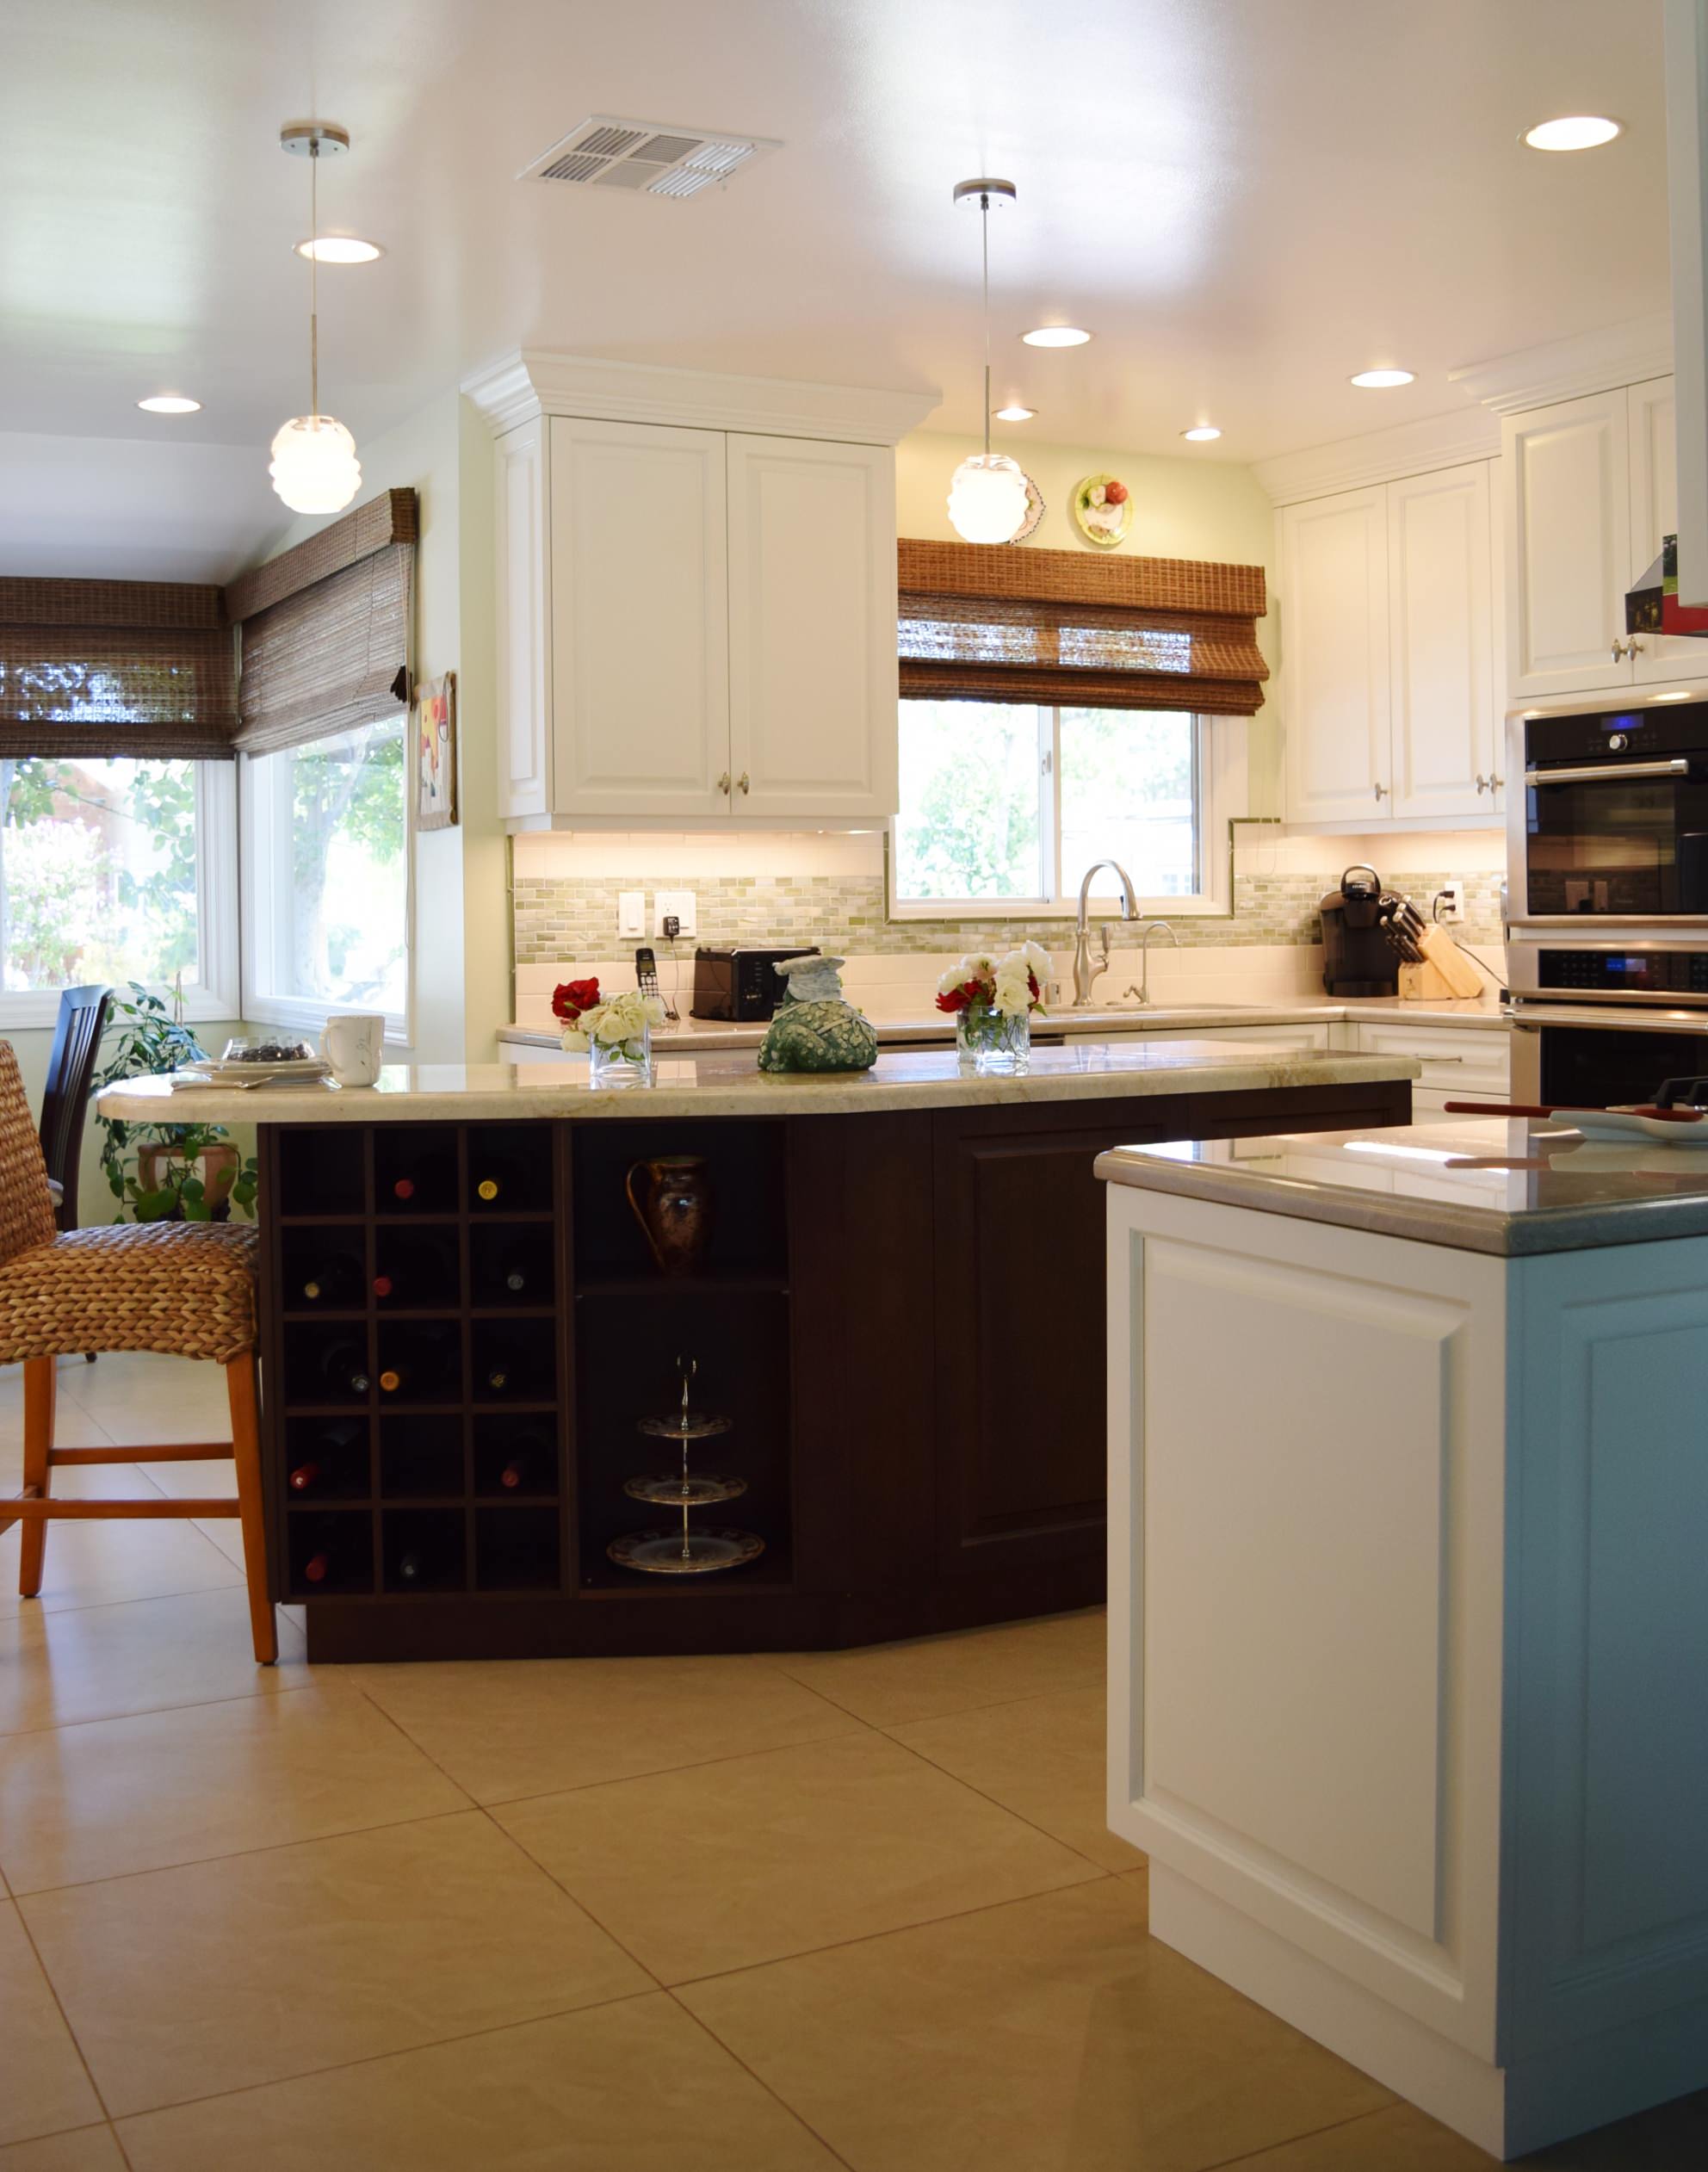 My Transitional Kitchen Design for a Client in Woodland Hills, Ca.